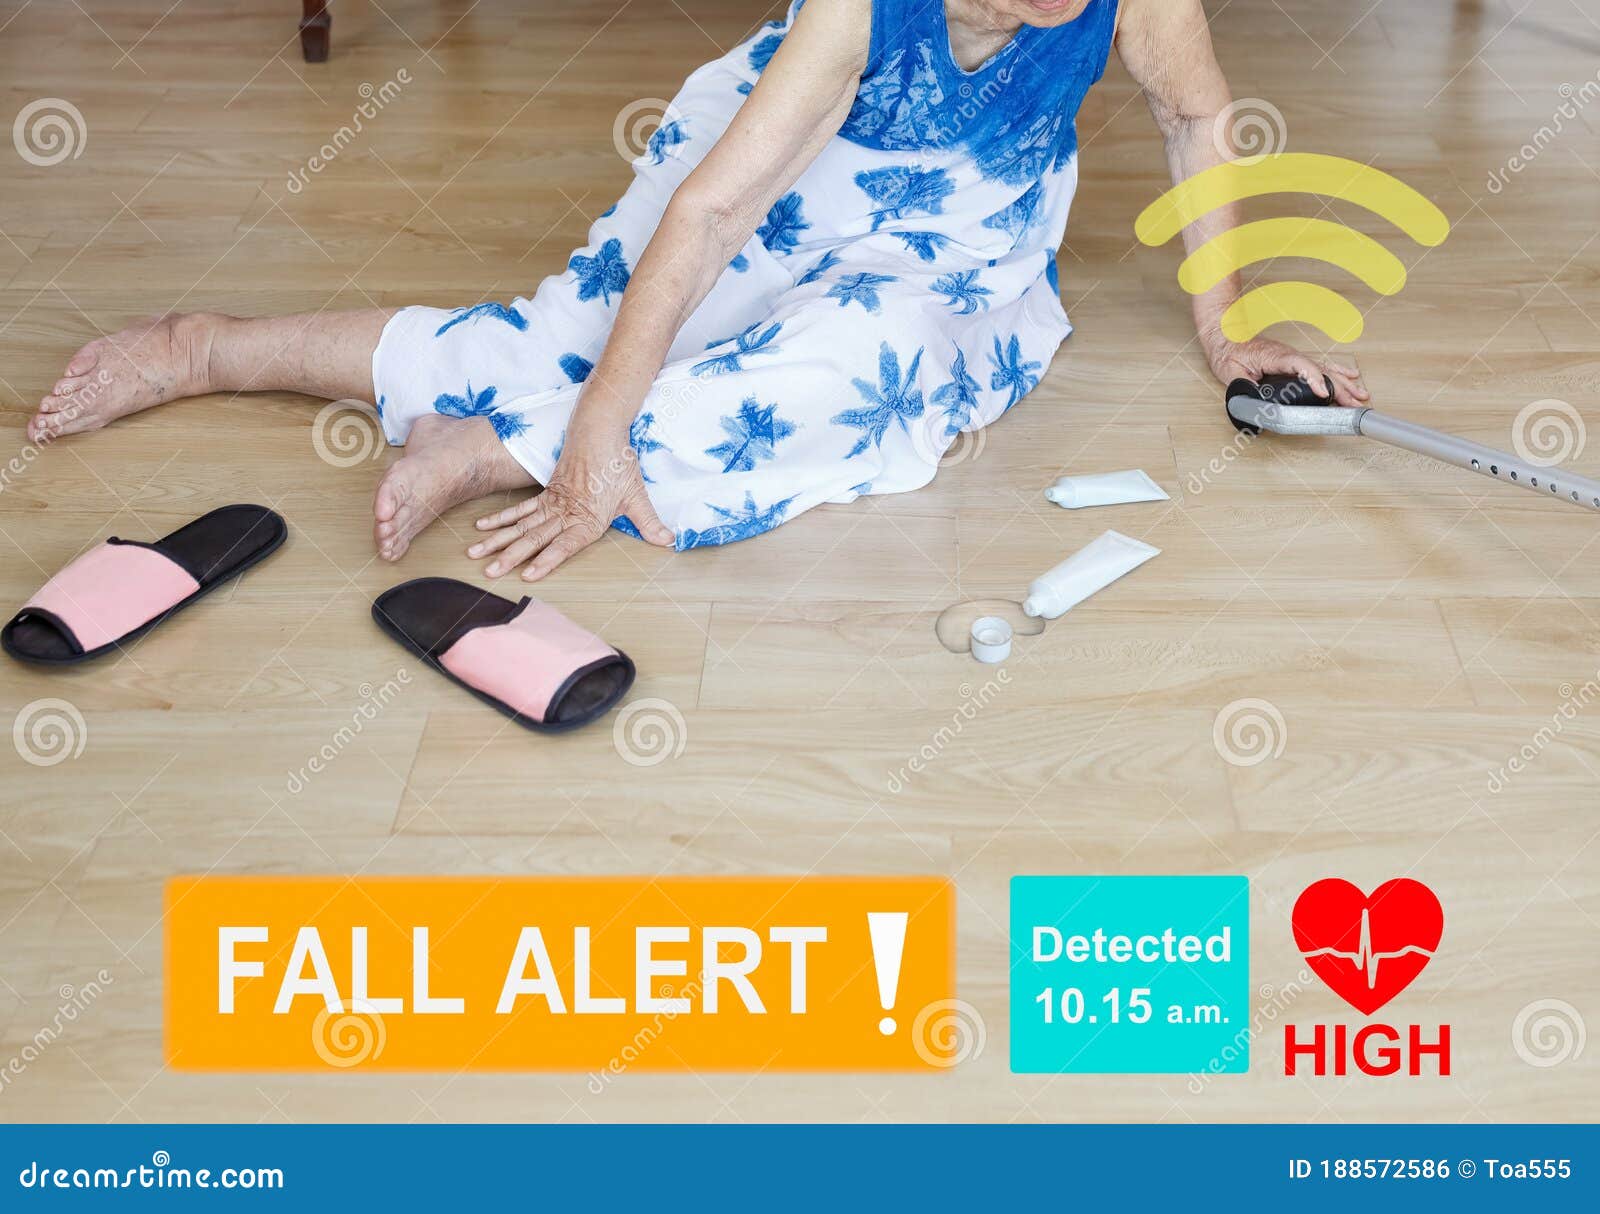 medical fall accident detection is alert that elderly woman falling in bathroom